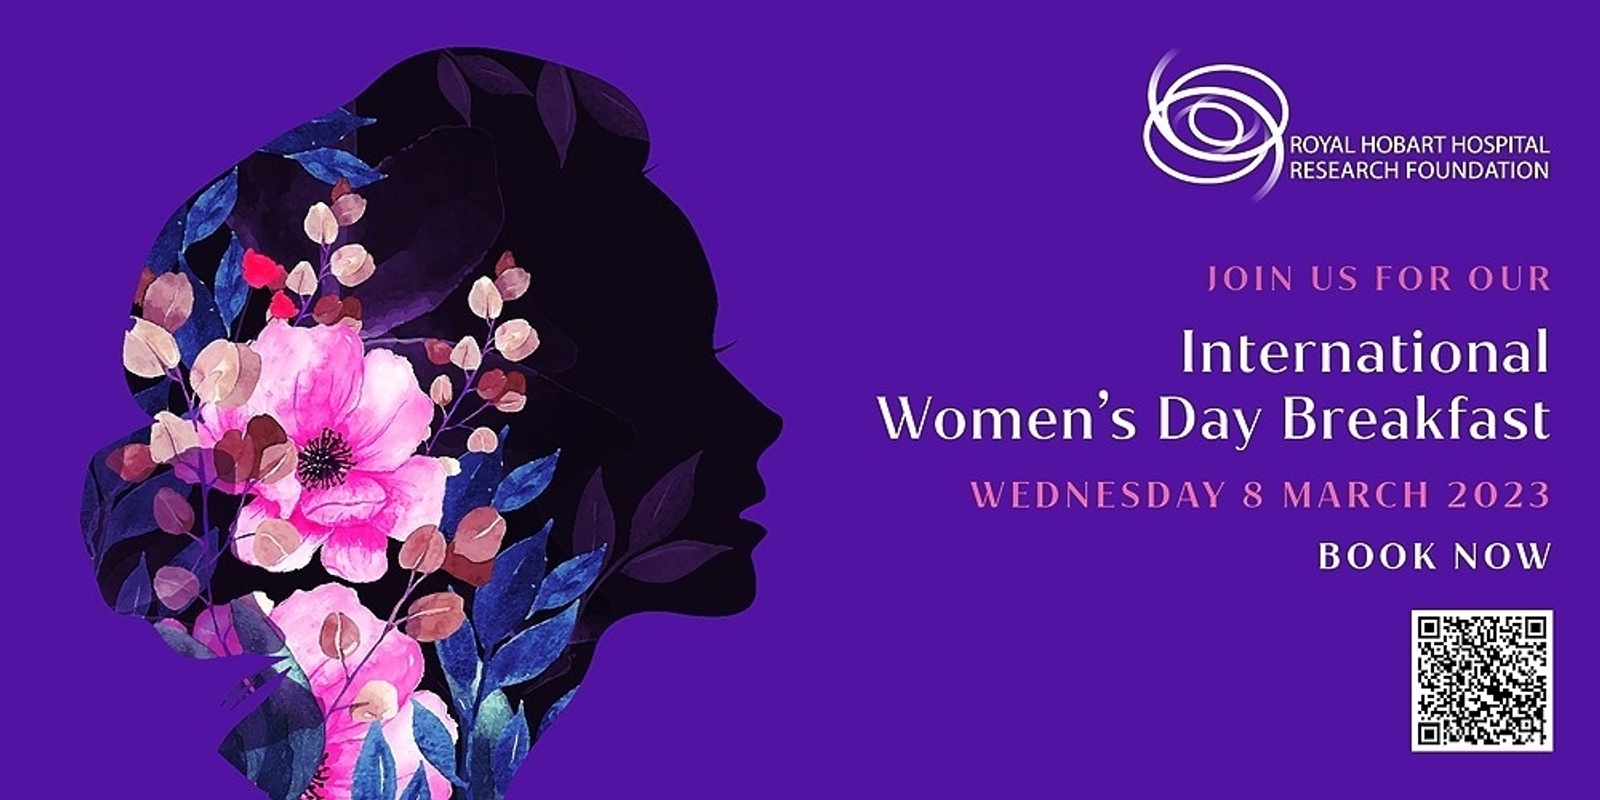 Banner image for RHH Research Foundation's 2023 International Women's Day Breakfast